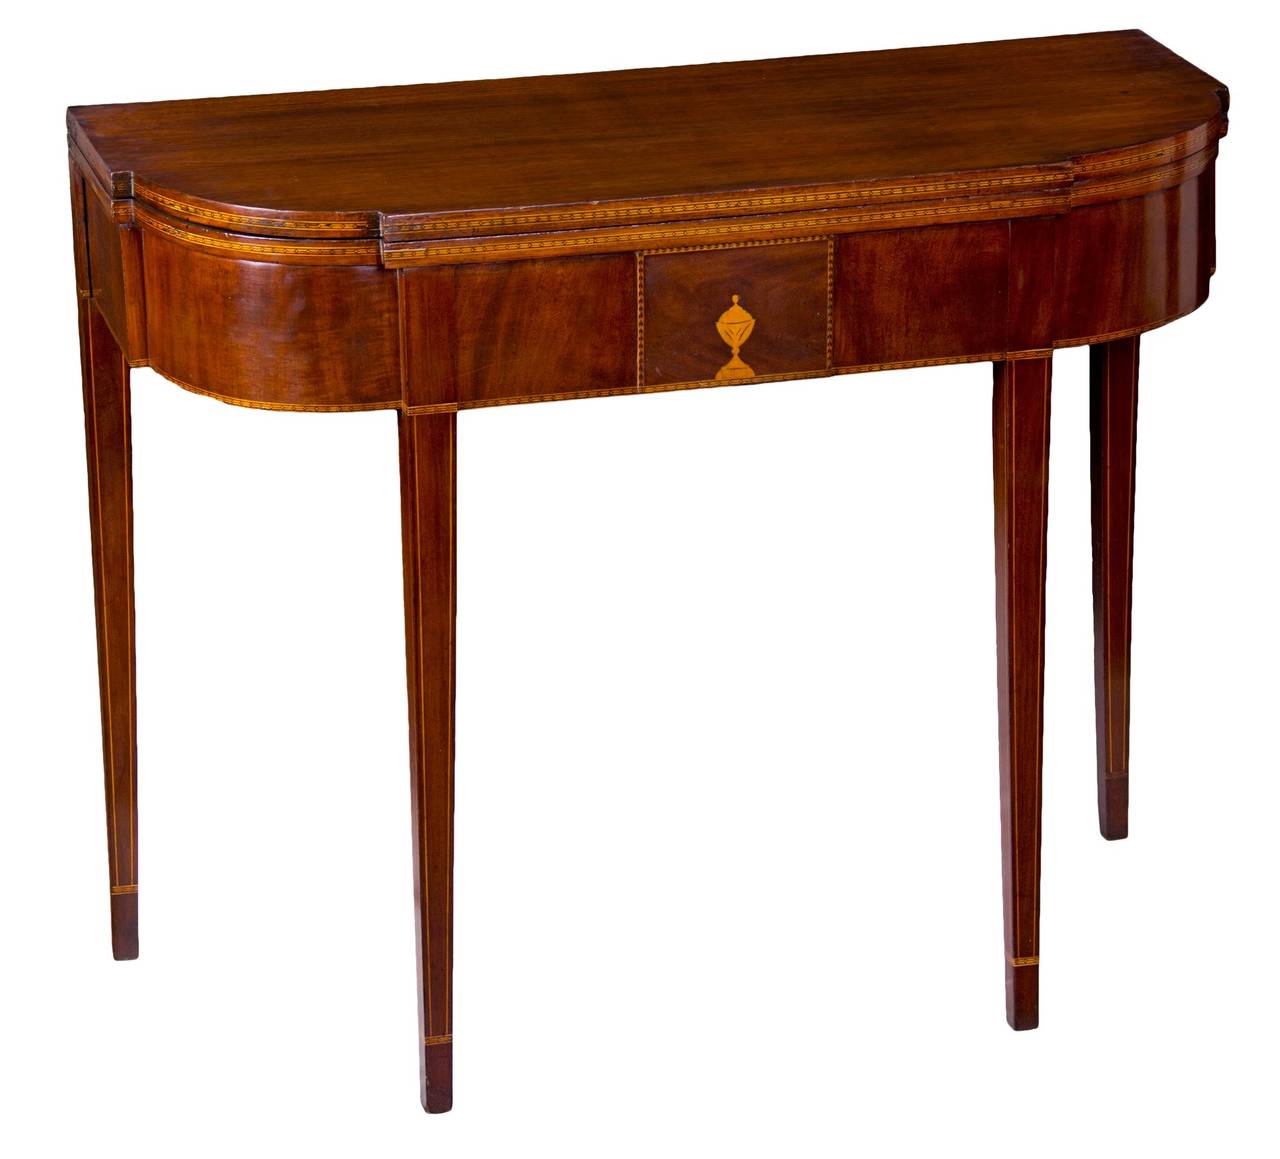 This card table came to us out of a local house sale through the hands of a Rhode Island picker. It is in fine condition with no breaks or alterations. It is attributed to Stephan and Thomas Goddard, however similar pieces come out of the workshop